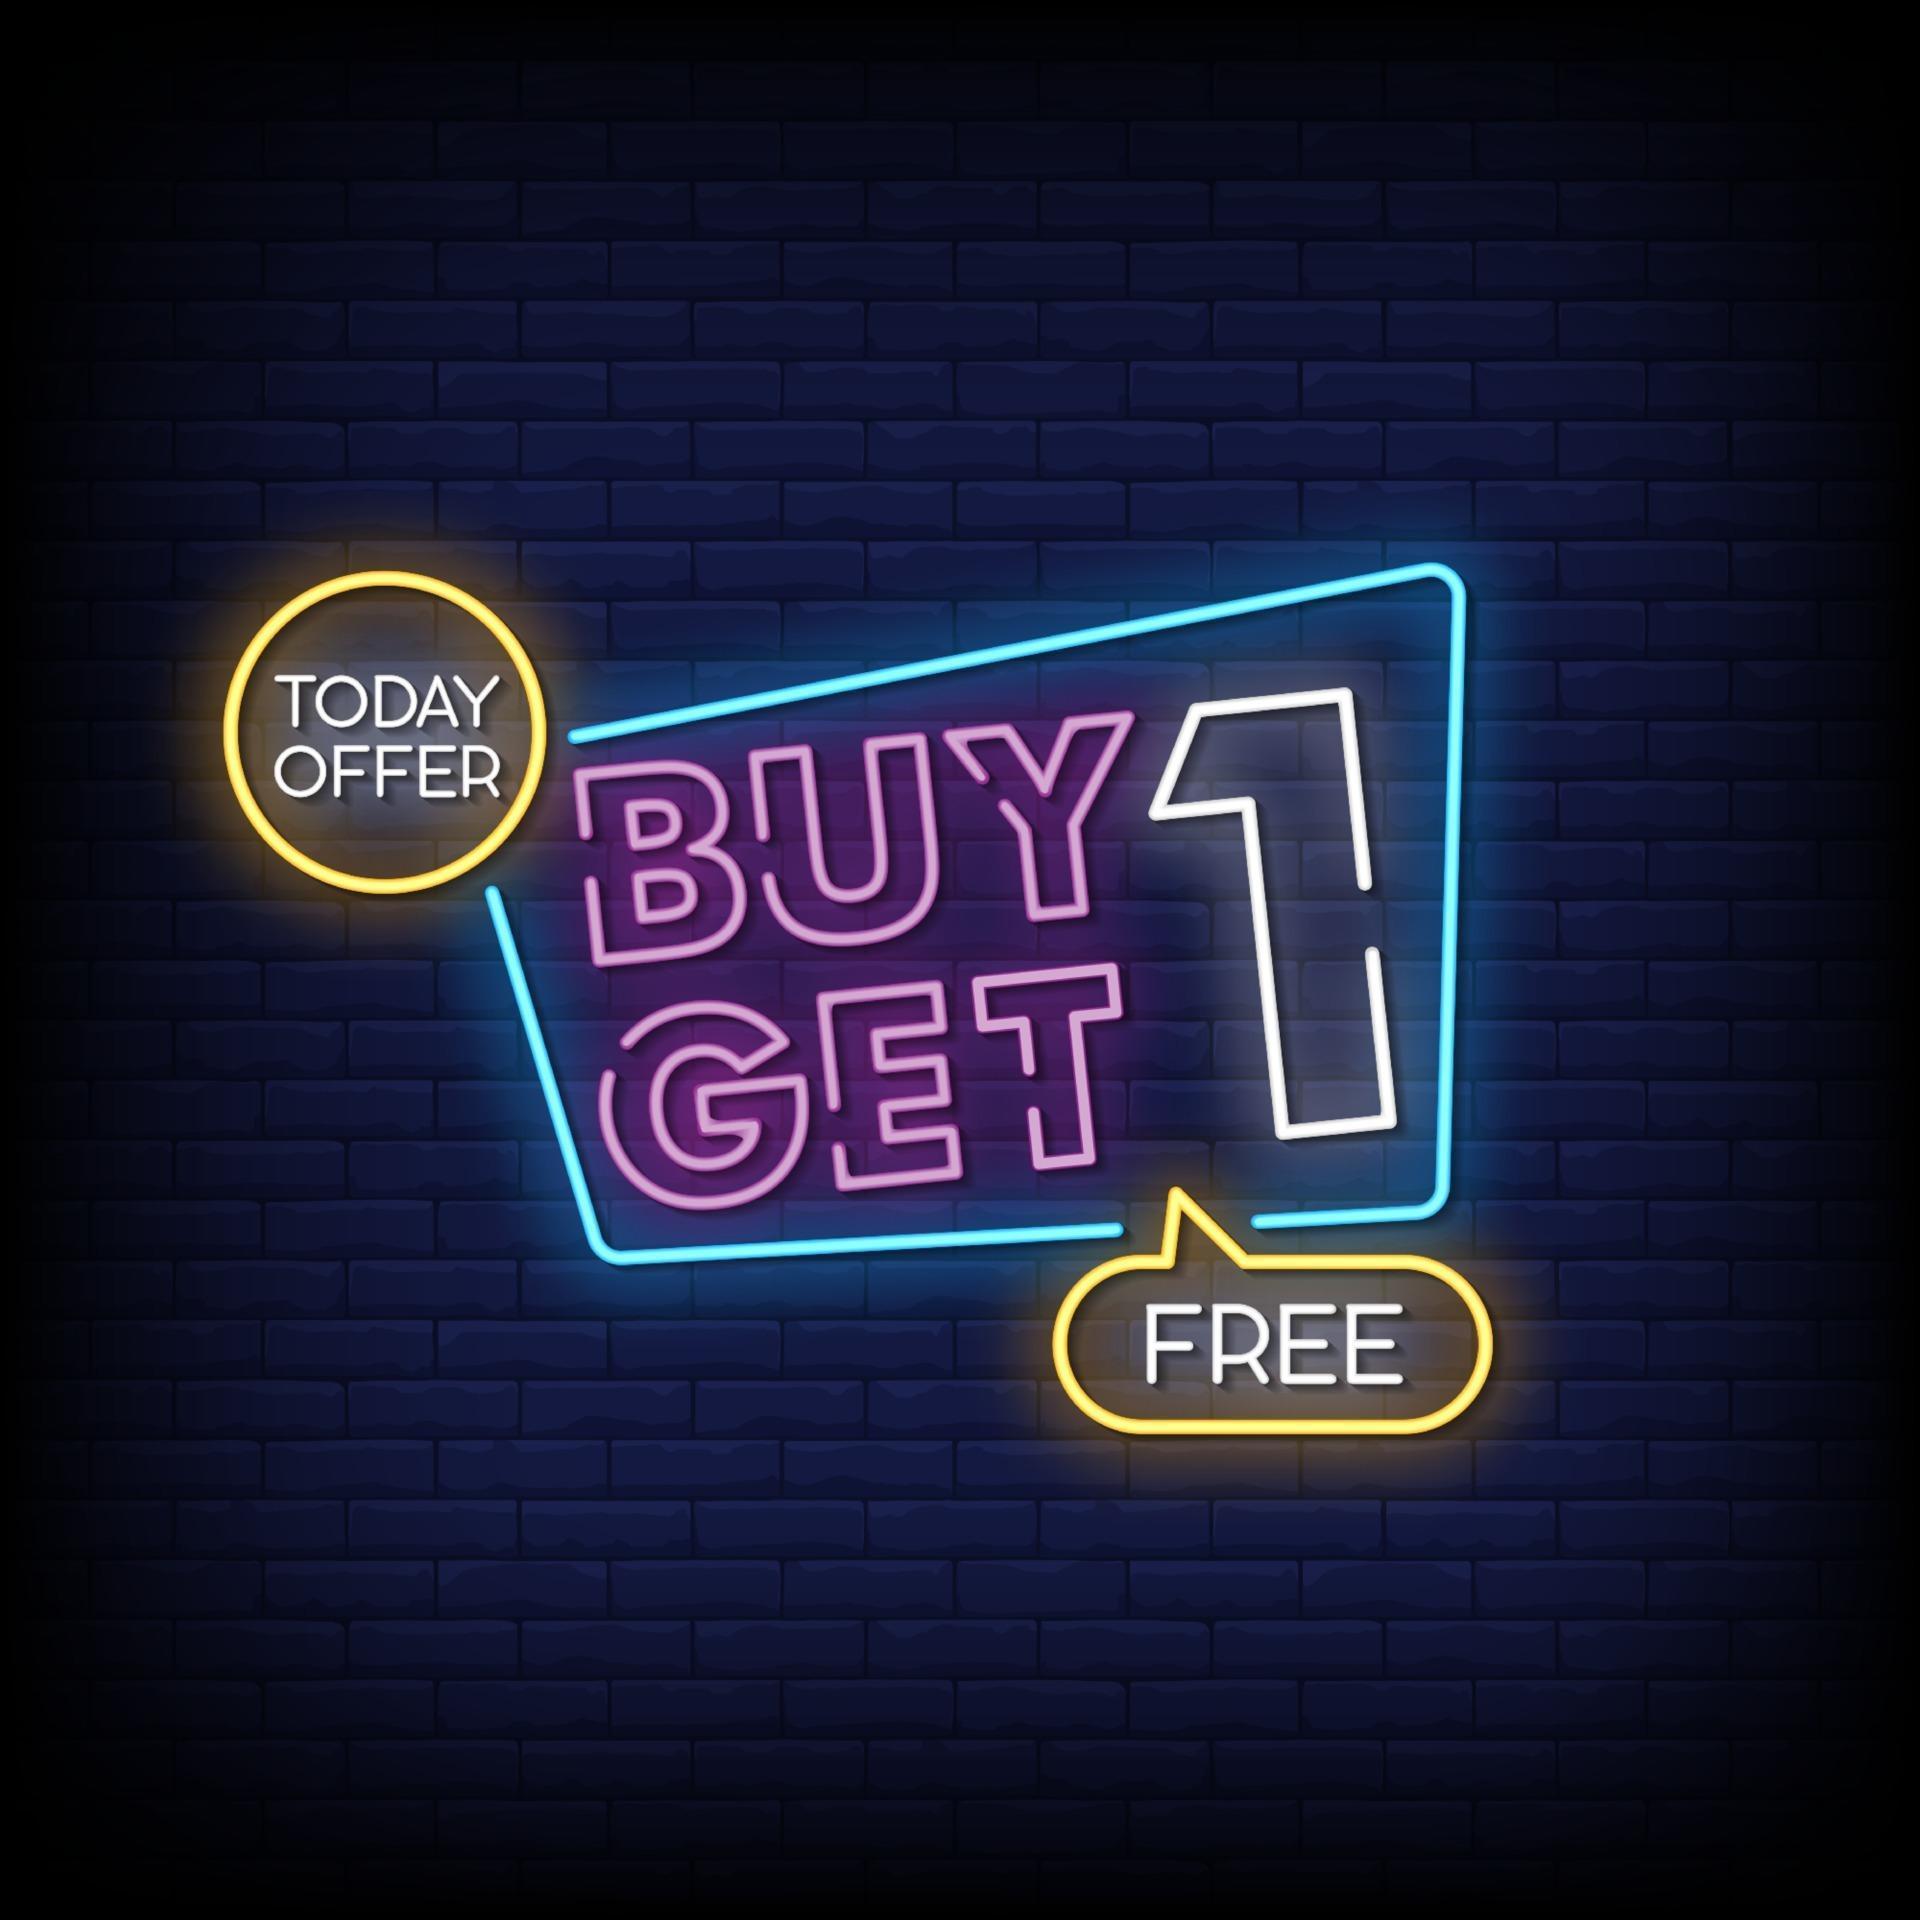 buy-one-get-one-free-neon-signs-style-text-vector-2413424-vector-art-at-vecteezy